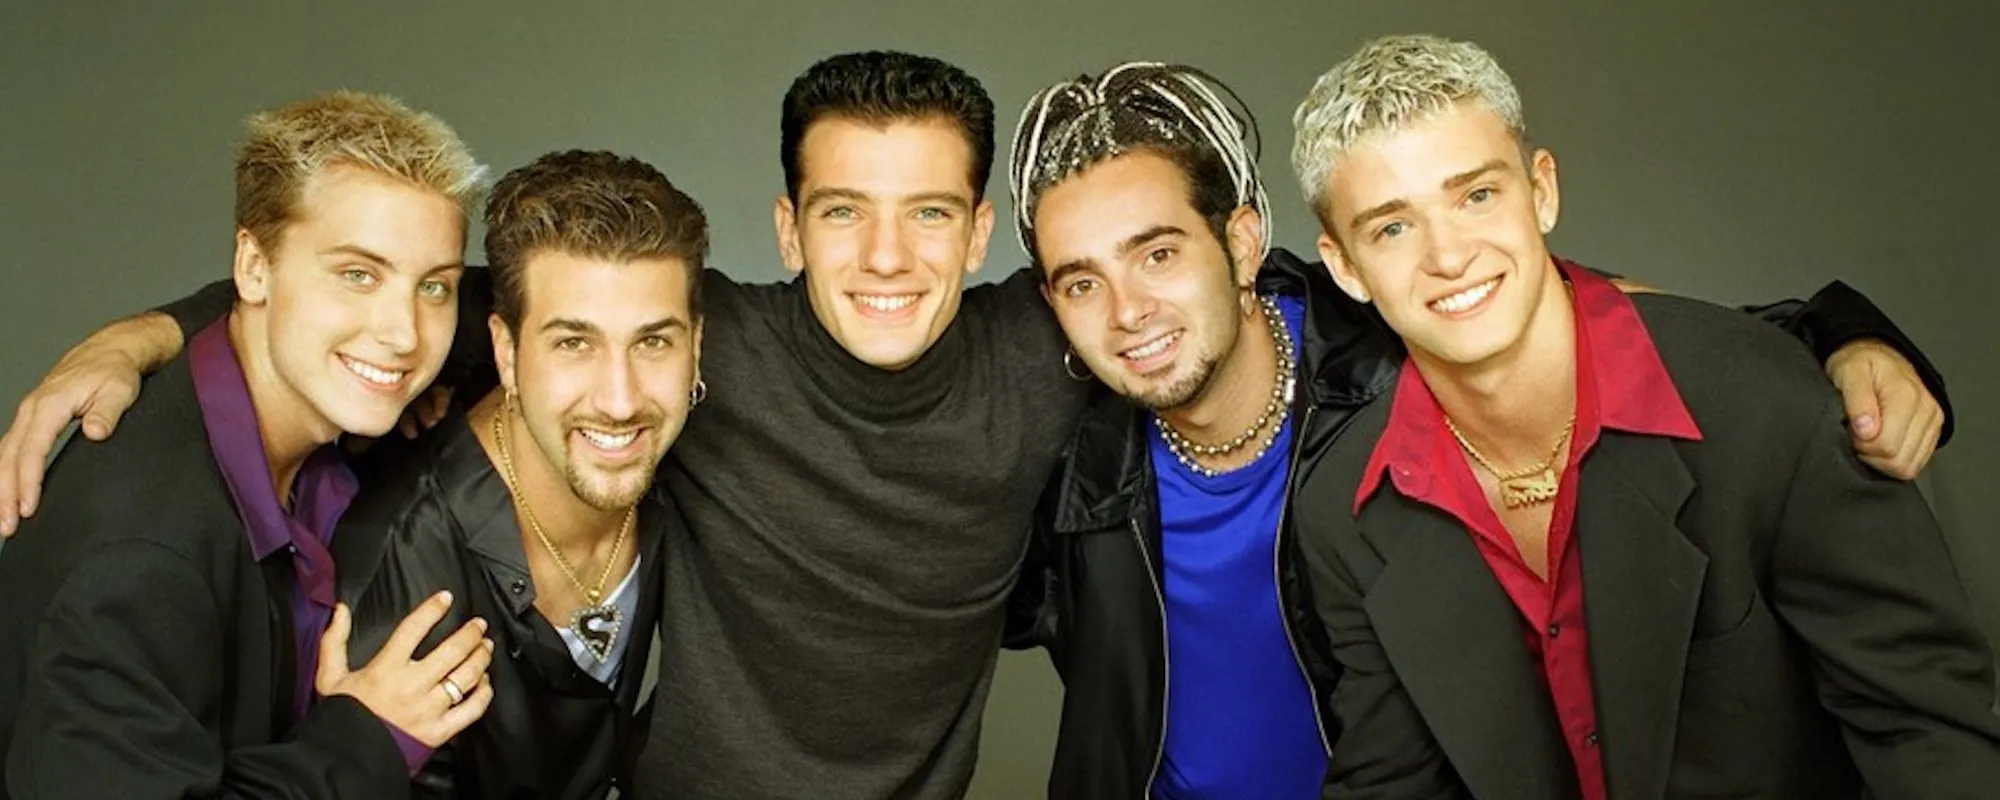 The Top 10 Boy Band Songs from the ’90s